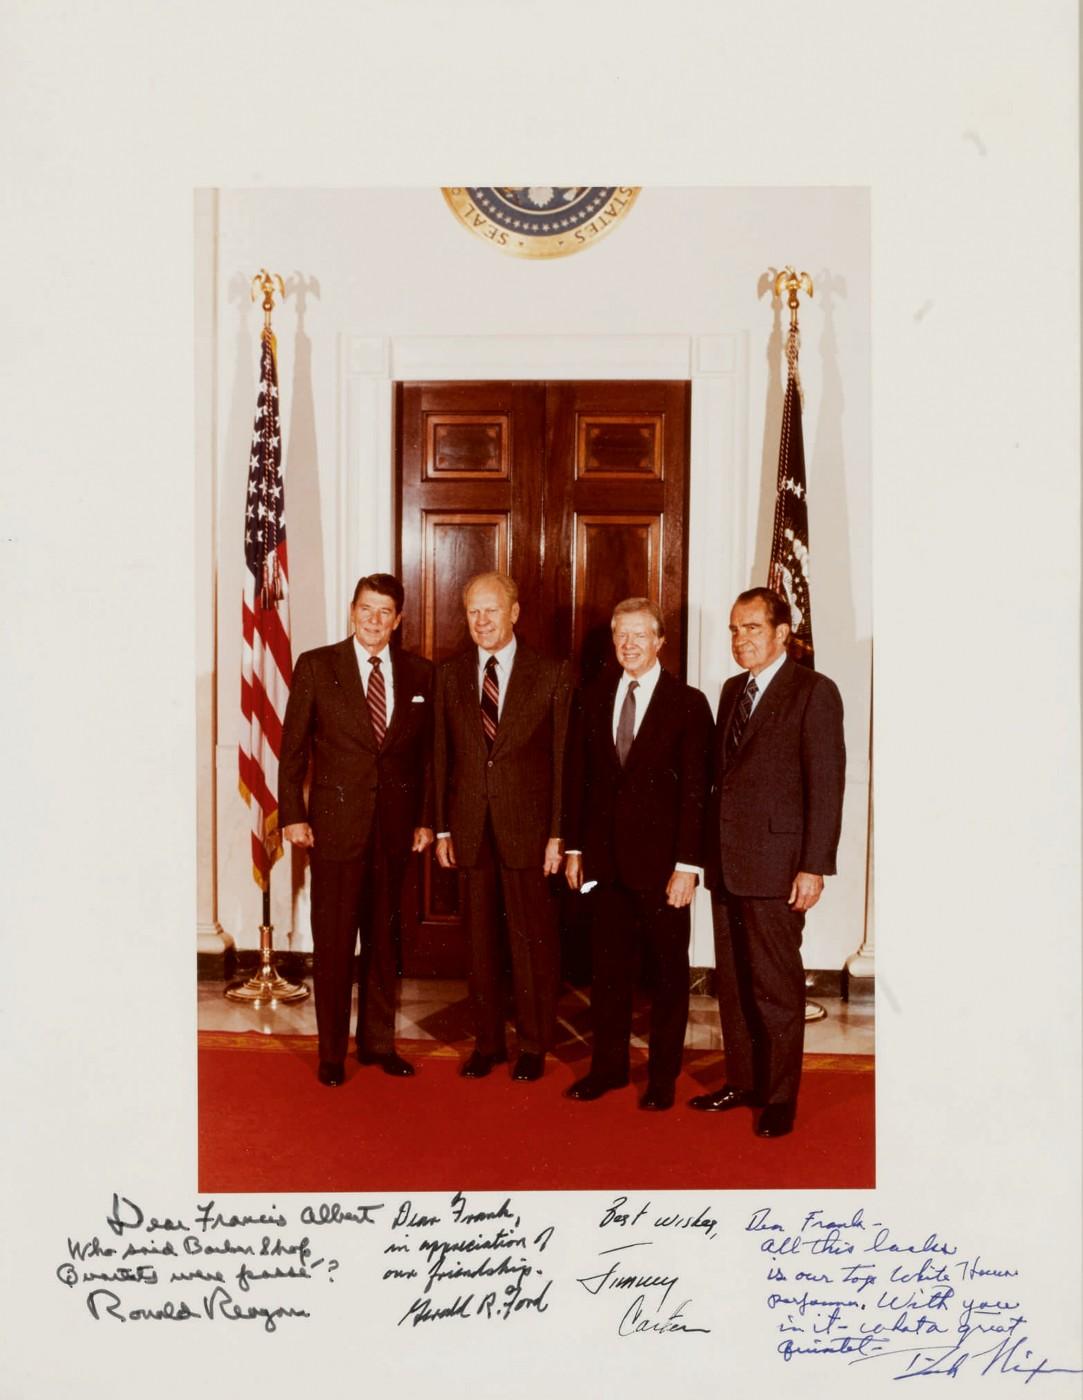 Color Photograph Inscribed to Frank Sinatra by Ronald Reagan, Gerald Ford, Jimmy Carter and Richard Nixon. 